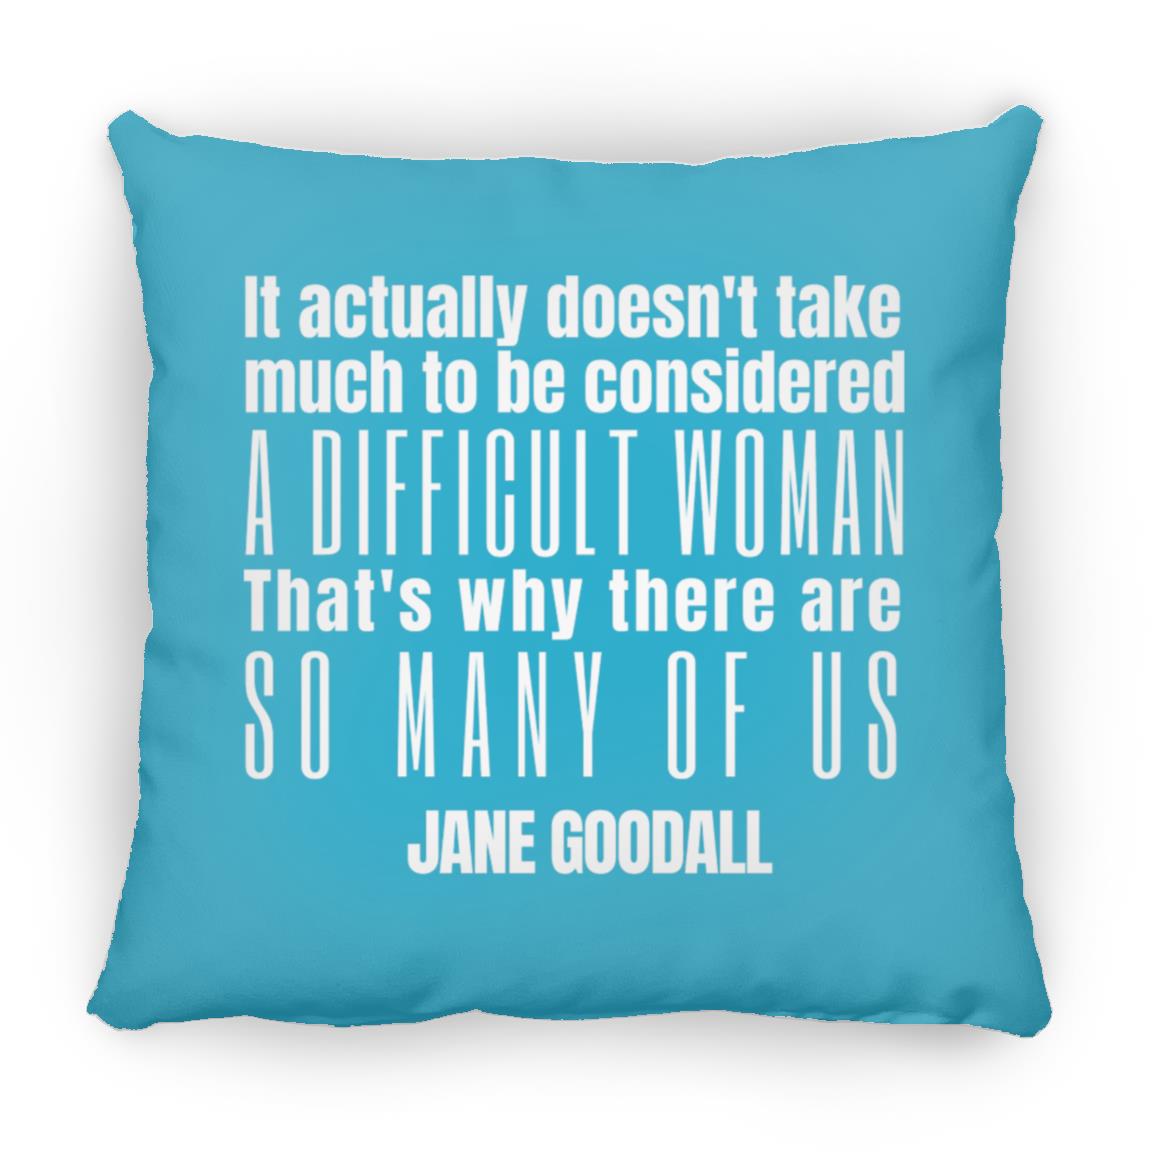 Jane Goodall Difficult Woman Quote Throw Pillow